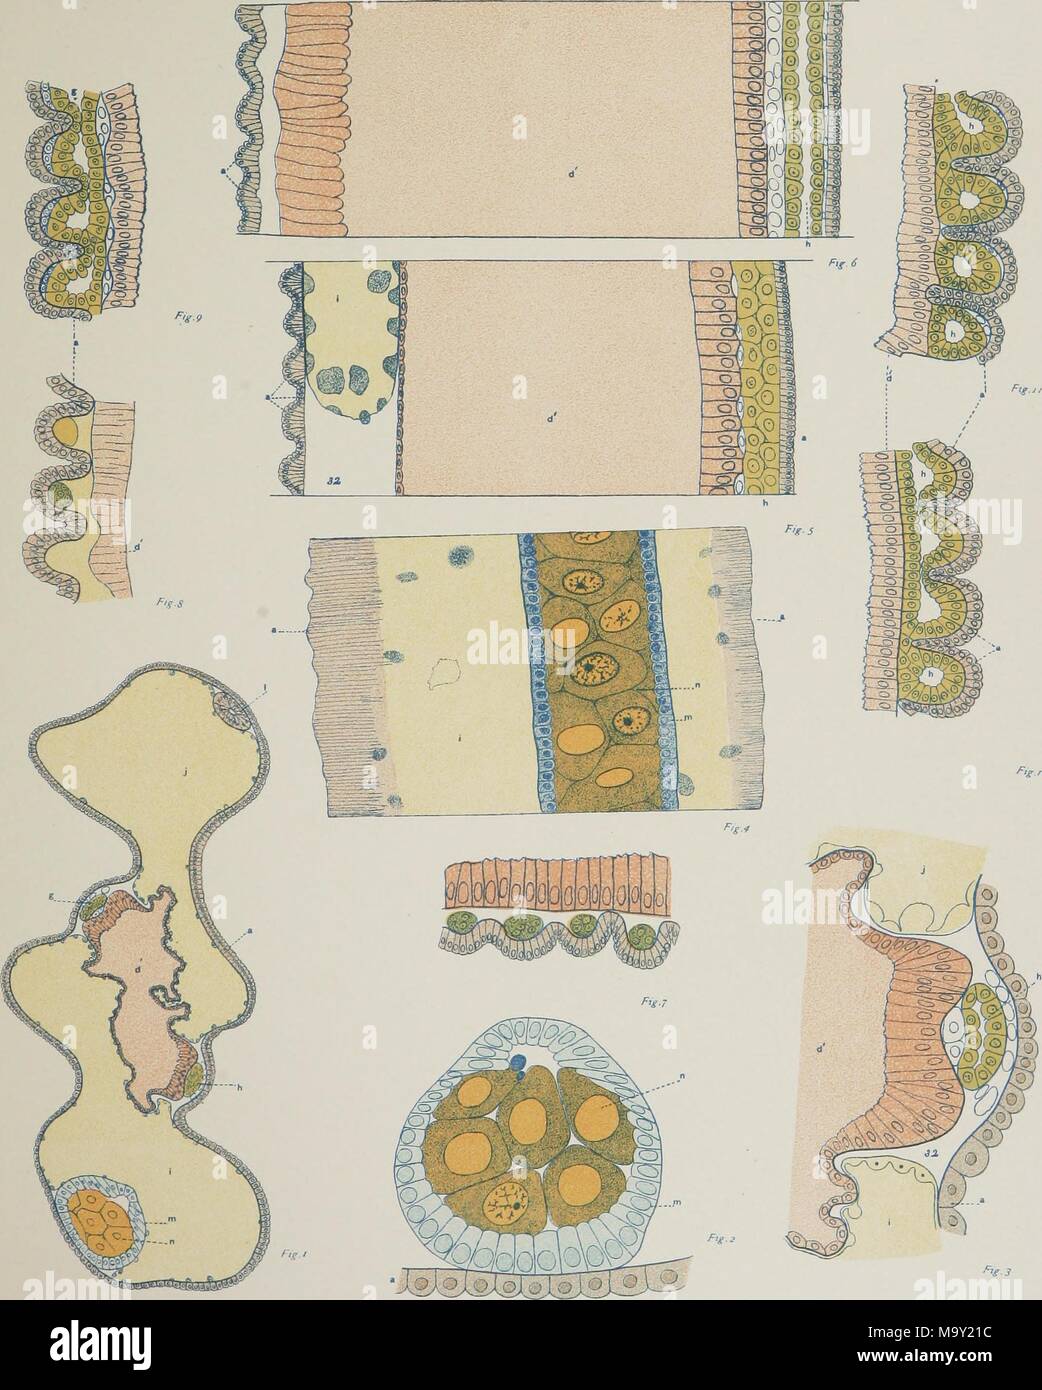 Color illustration depicting numbered cross-sections of the cells of marine invertebrate, or tunicate plankton, salpa or salp, from the volume 'The genus Salpa, ' authored by William Keith Brooks and Maynard Mayo Metcalf, 1893. Courtesy Internet Archive. () Stock Photo